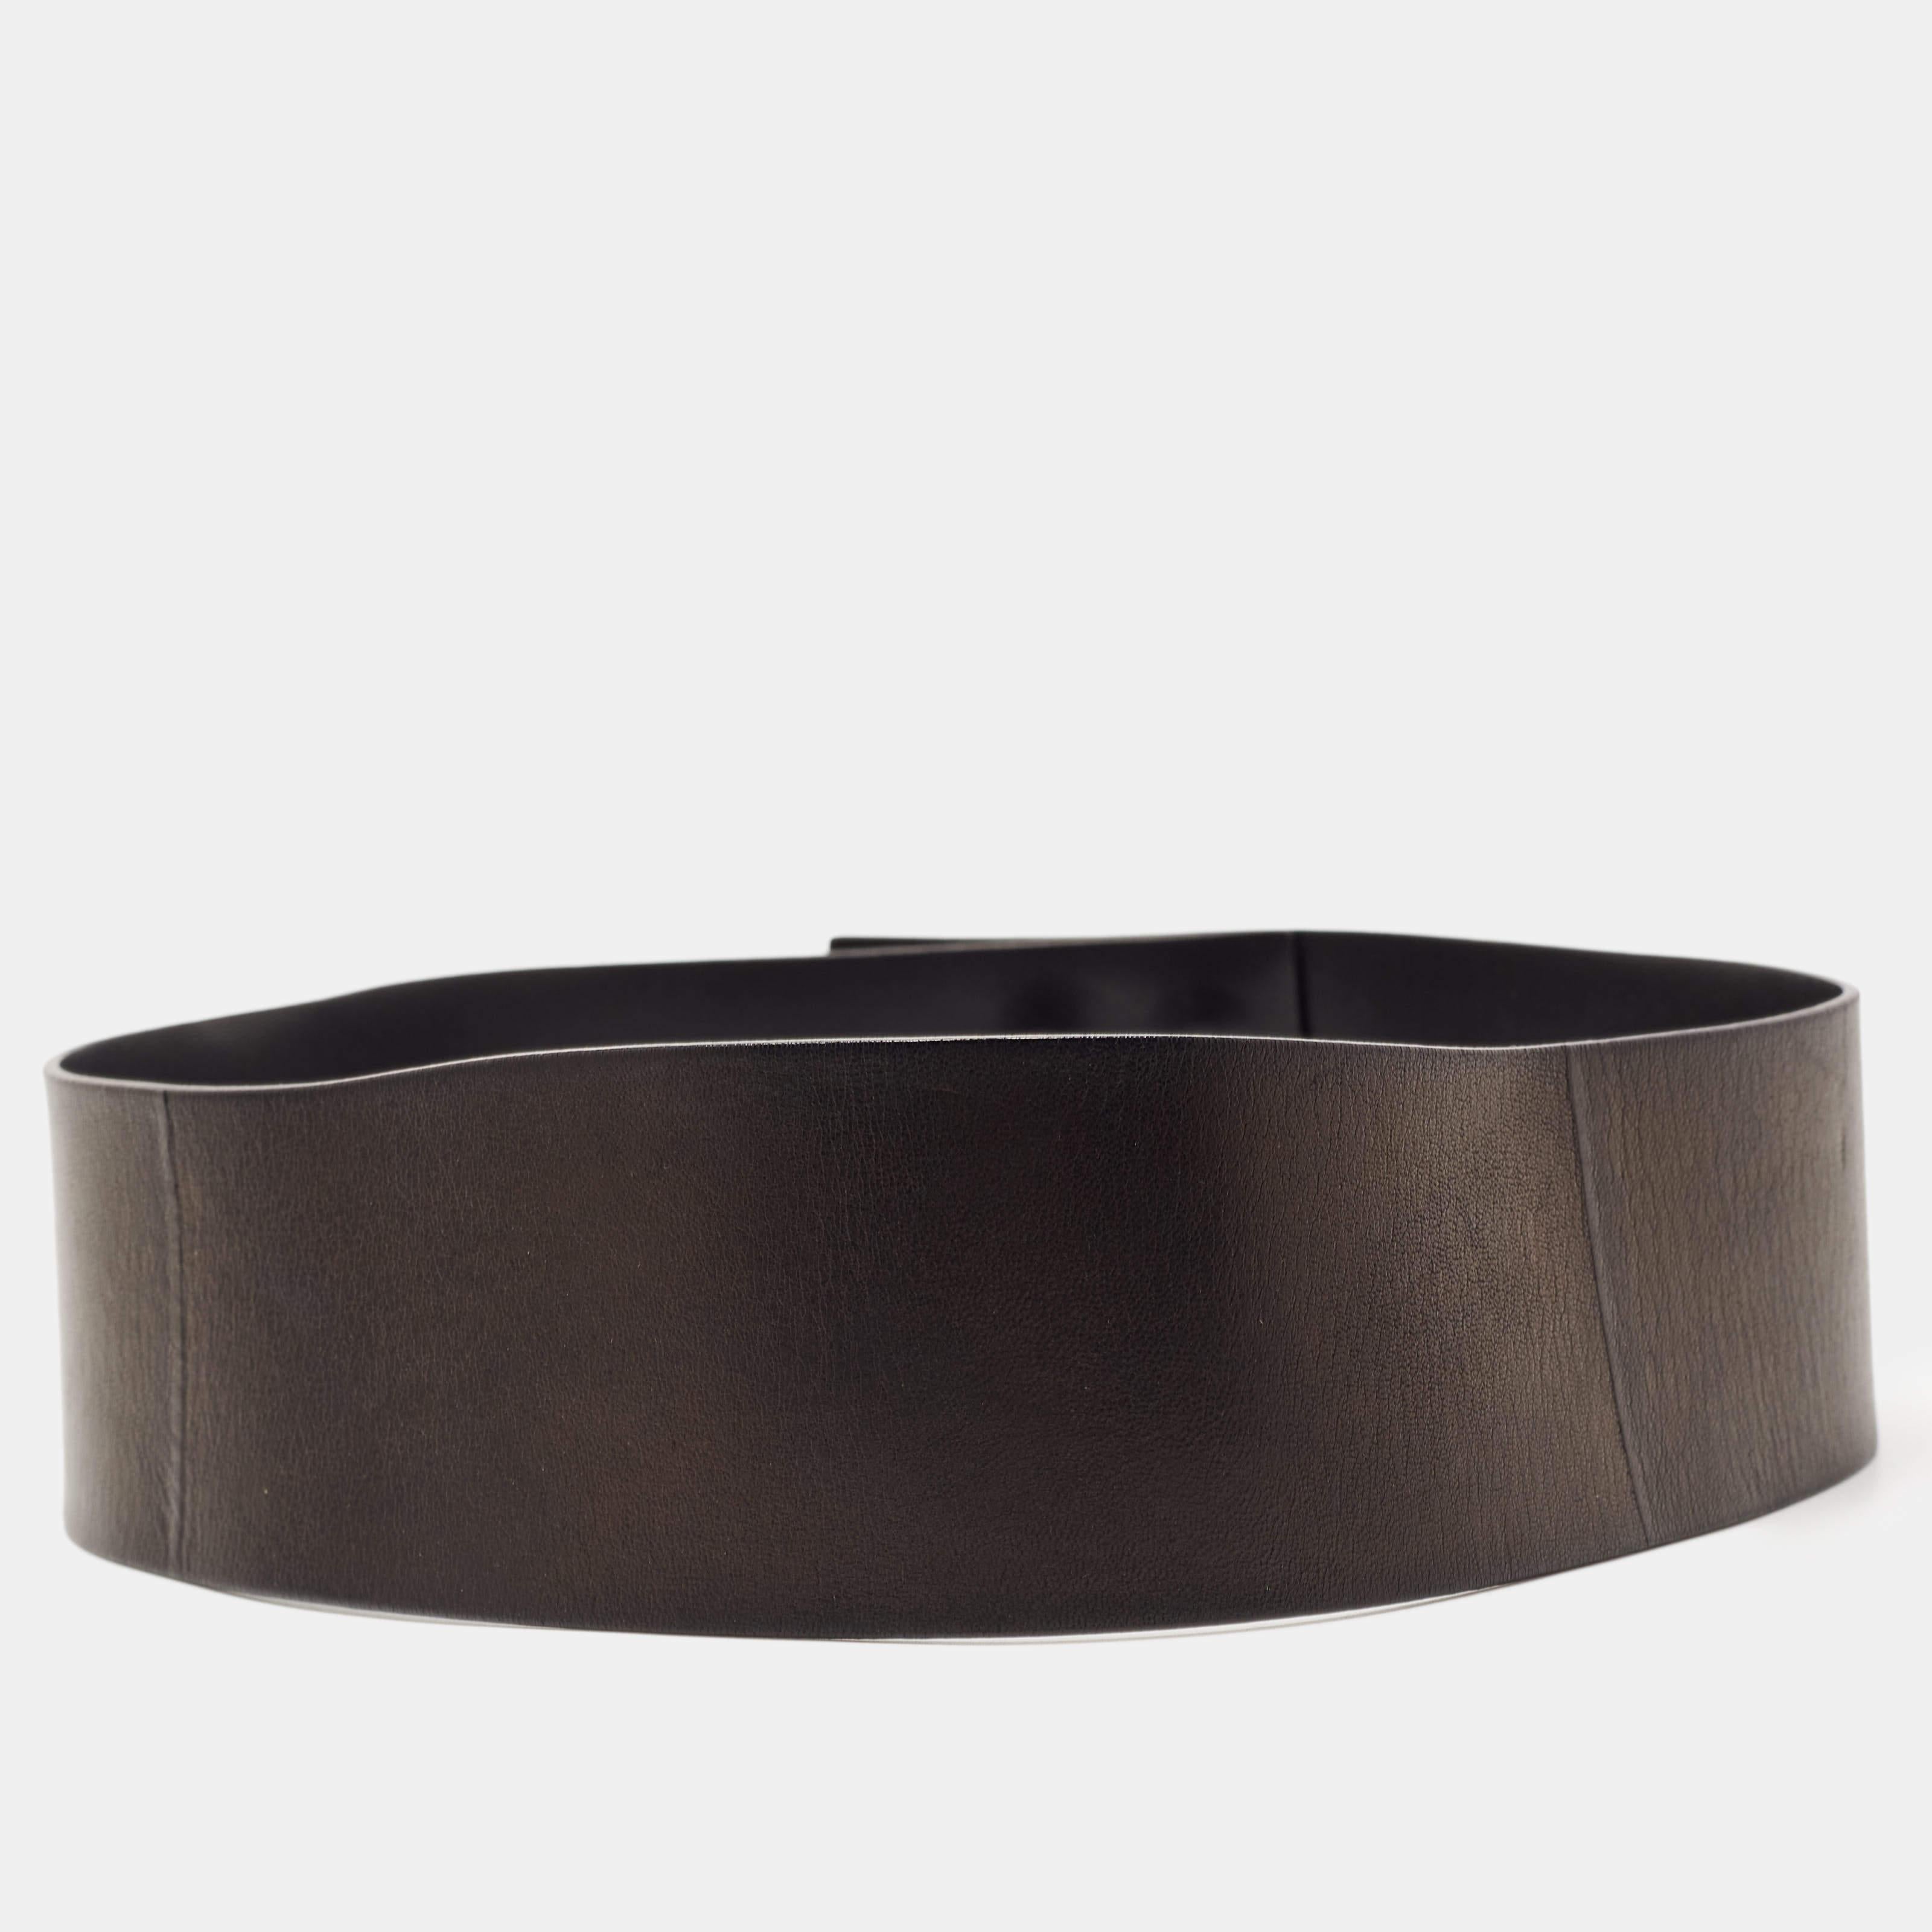 Accessorize like a fashionista using this amazing belt by Gucci. The piece is crafted from leather in a black hue and completed with a gold-tone plate attached.

